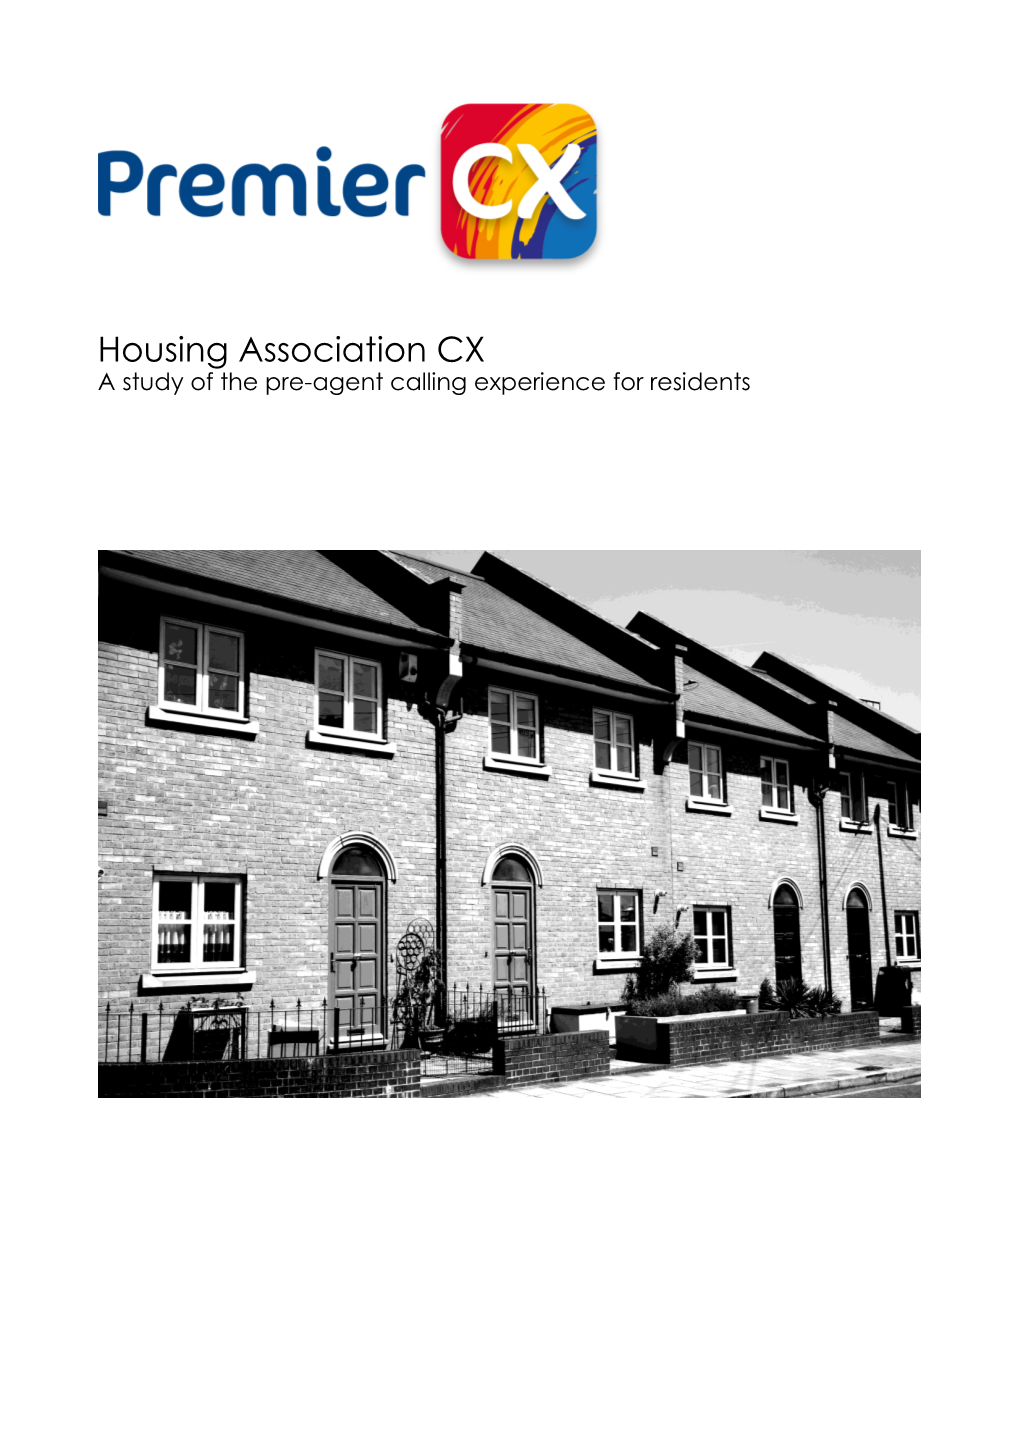 Housing Association CX a Study of the Pre-Agent Calling Experience for Residents